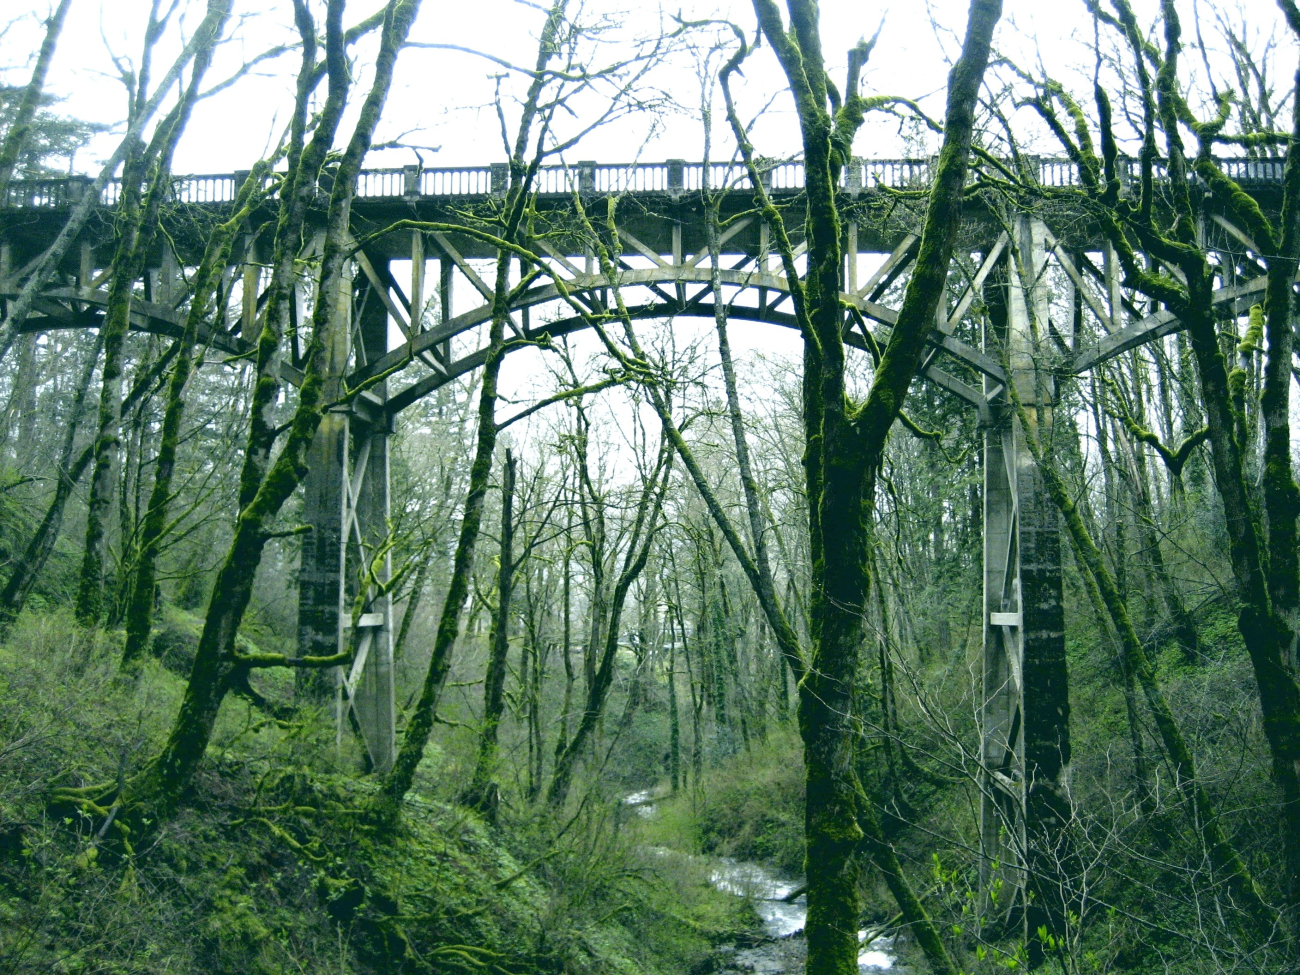 The old highway bridge at Multnomah Falls covered in moss